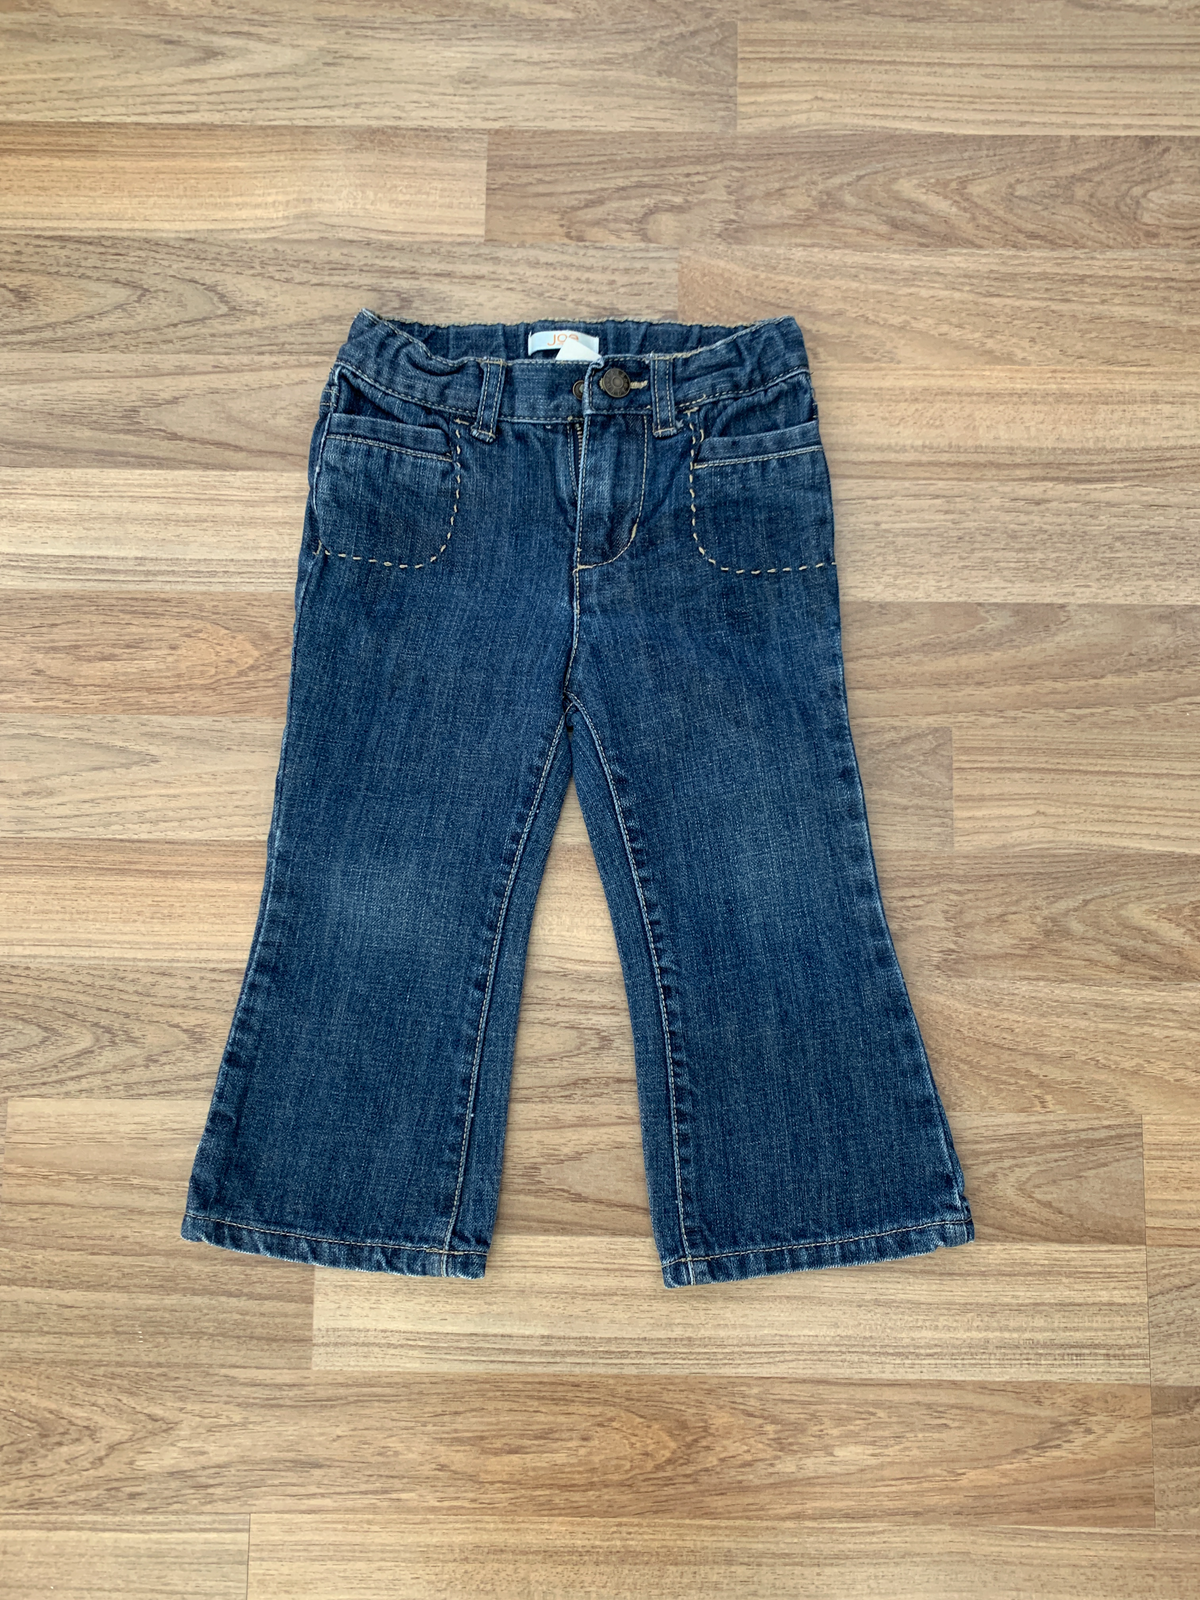 Jeans (Girls Size 2)